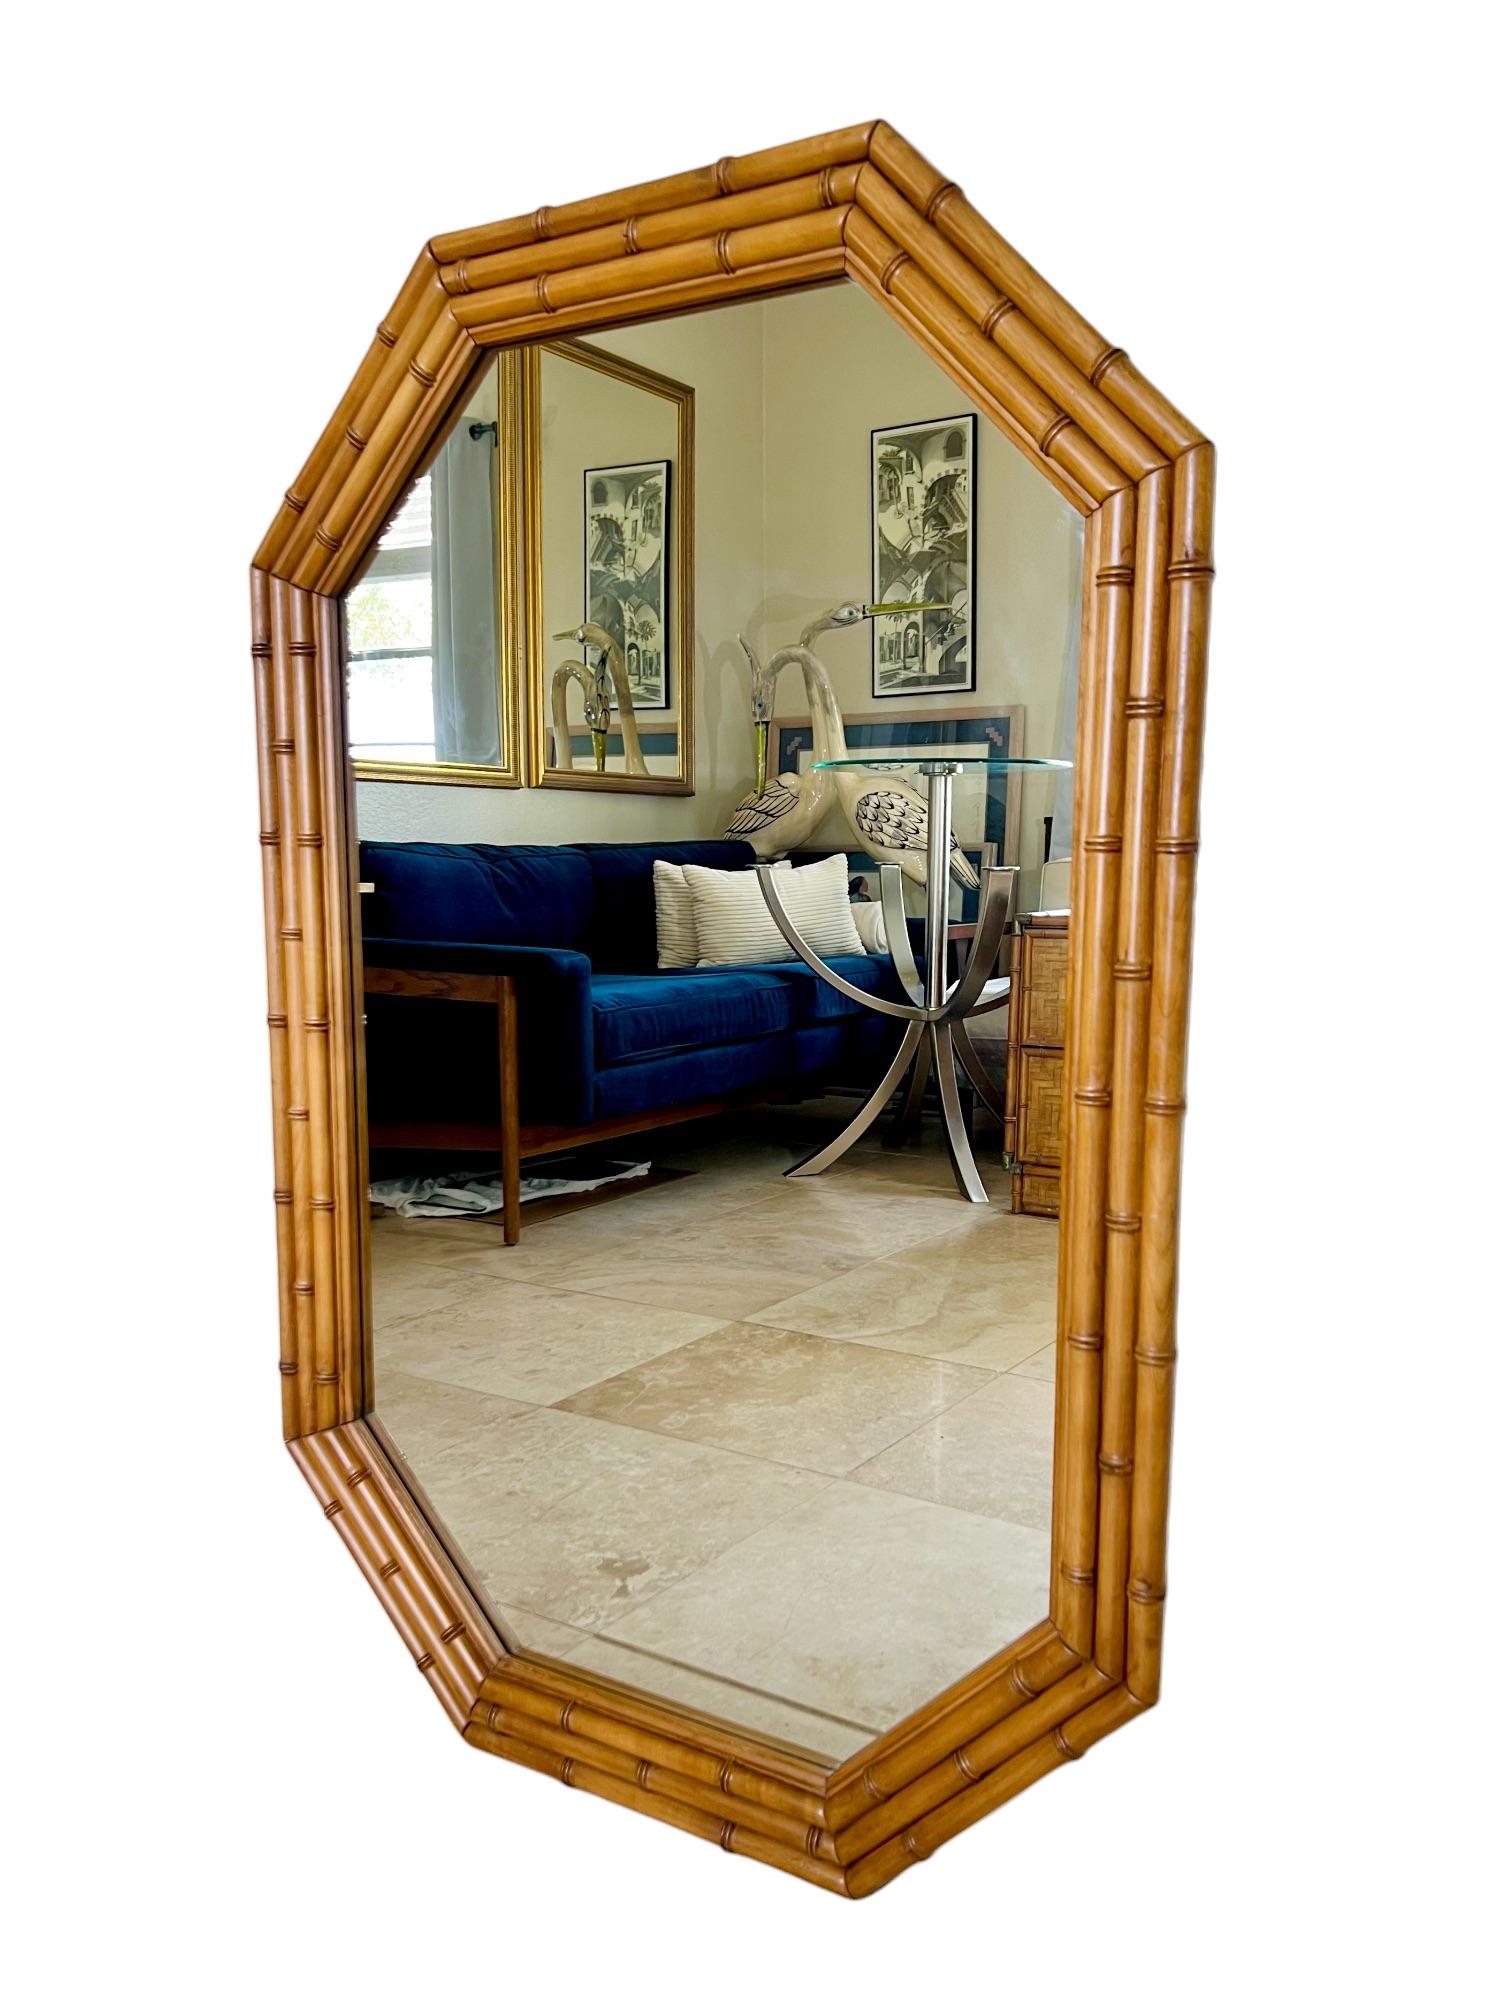 An exceptional mid 20th century Palm Beach regency style wall mirror by Dixie Furniture. It features an elongated octagonal shape and a triple row faux bamboo turned wood frame.

Dimensions: 31.5